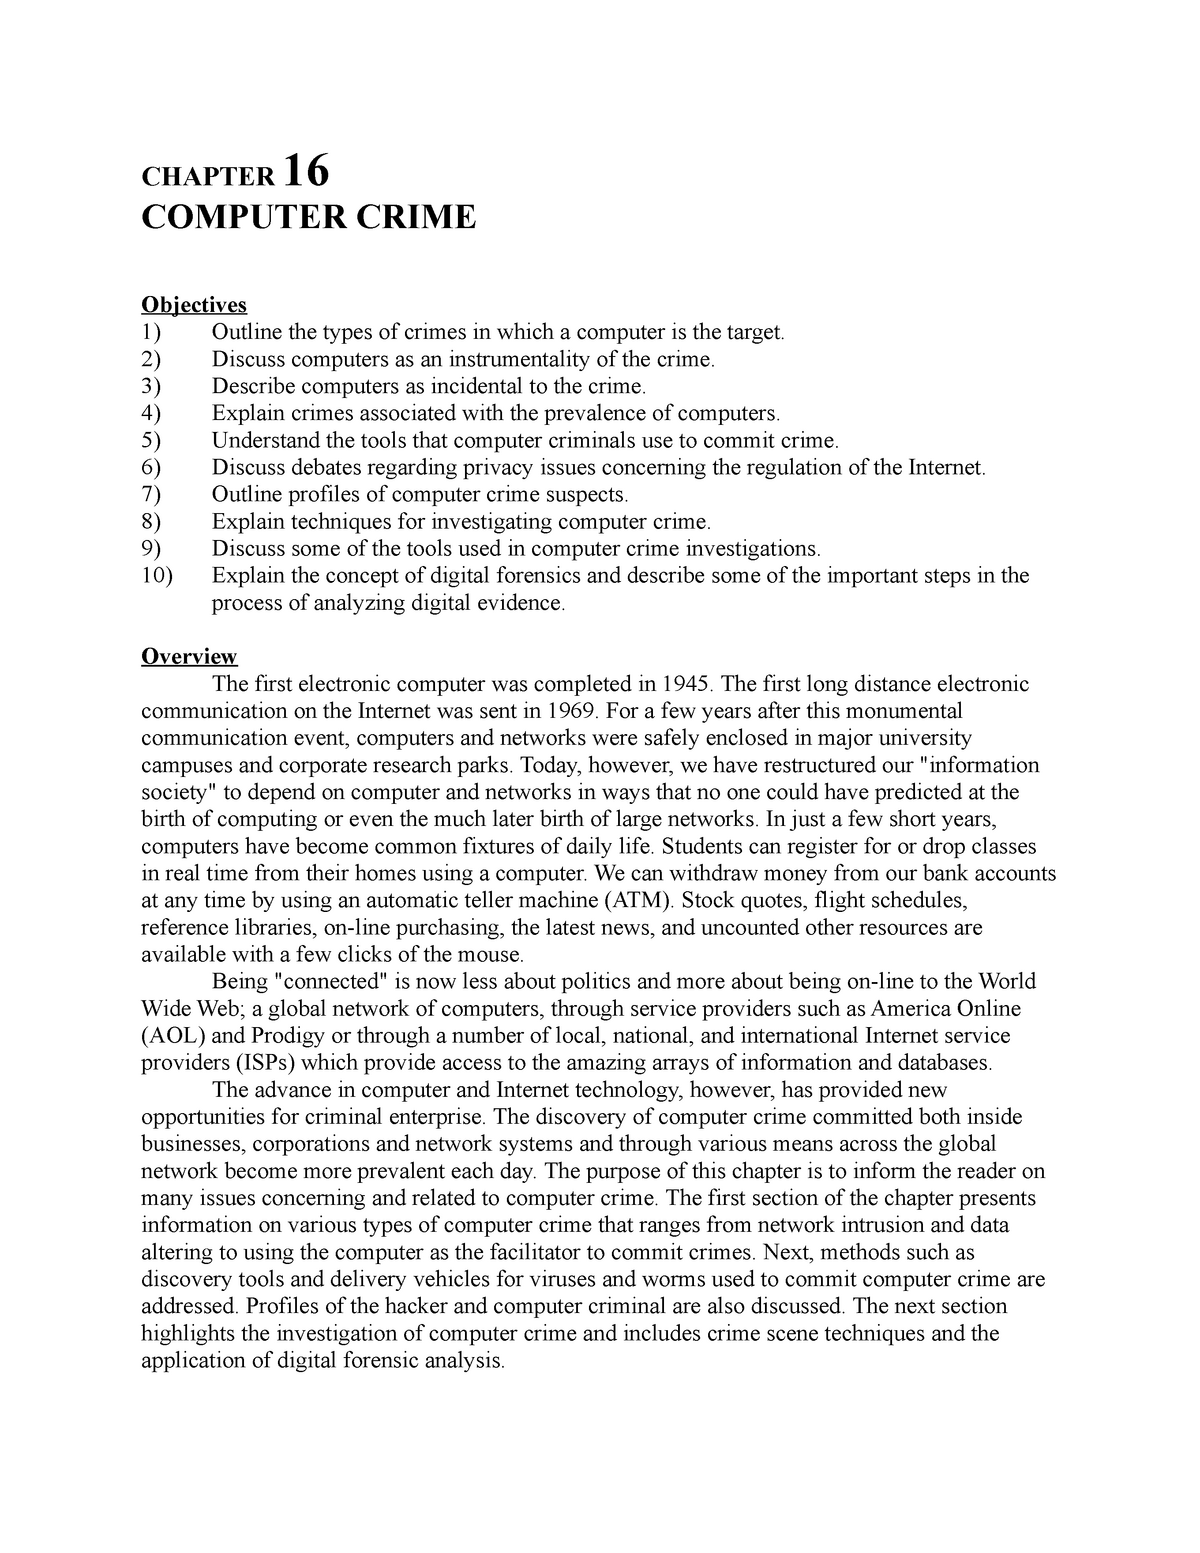 research papers on computer crimes